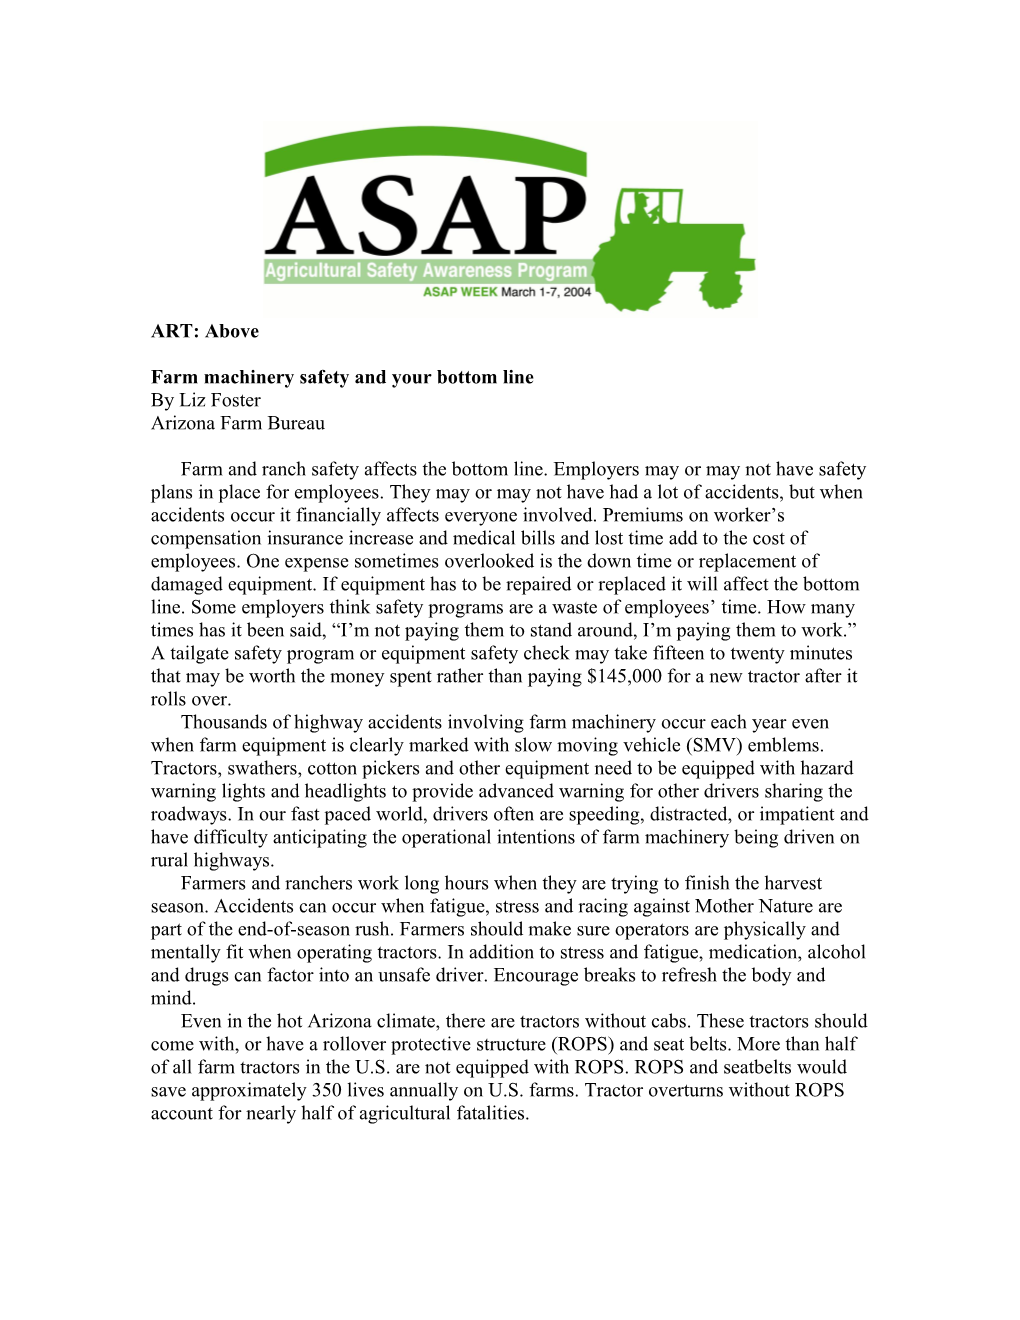 Farm Machinery Safety Affects Bottom Line